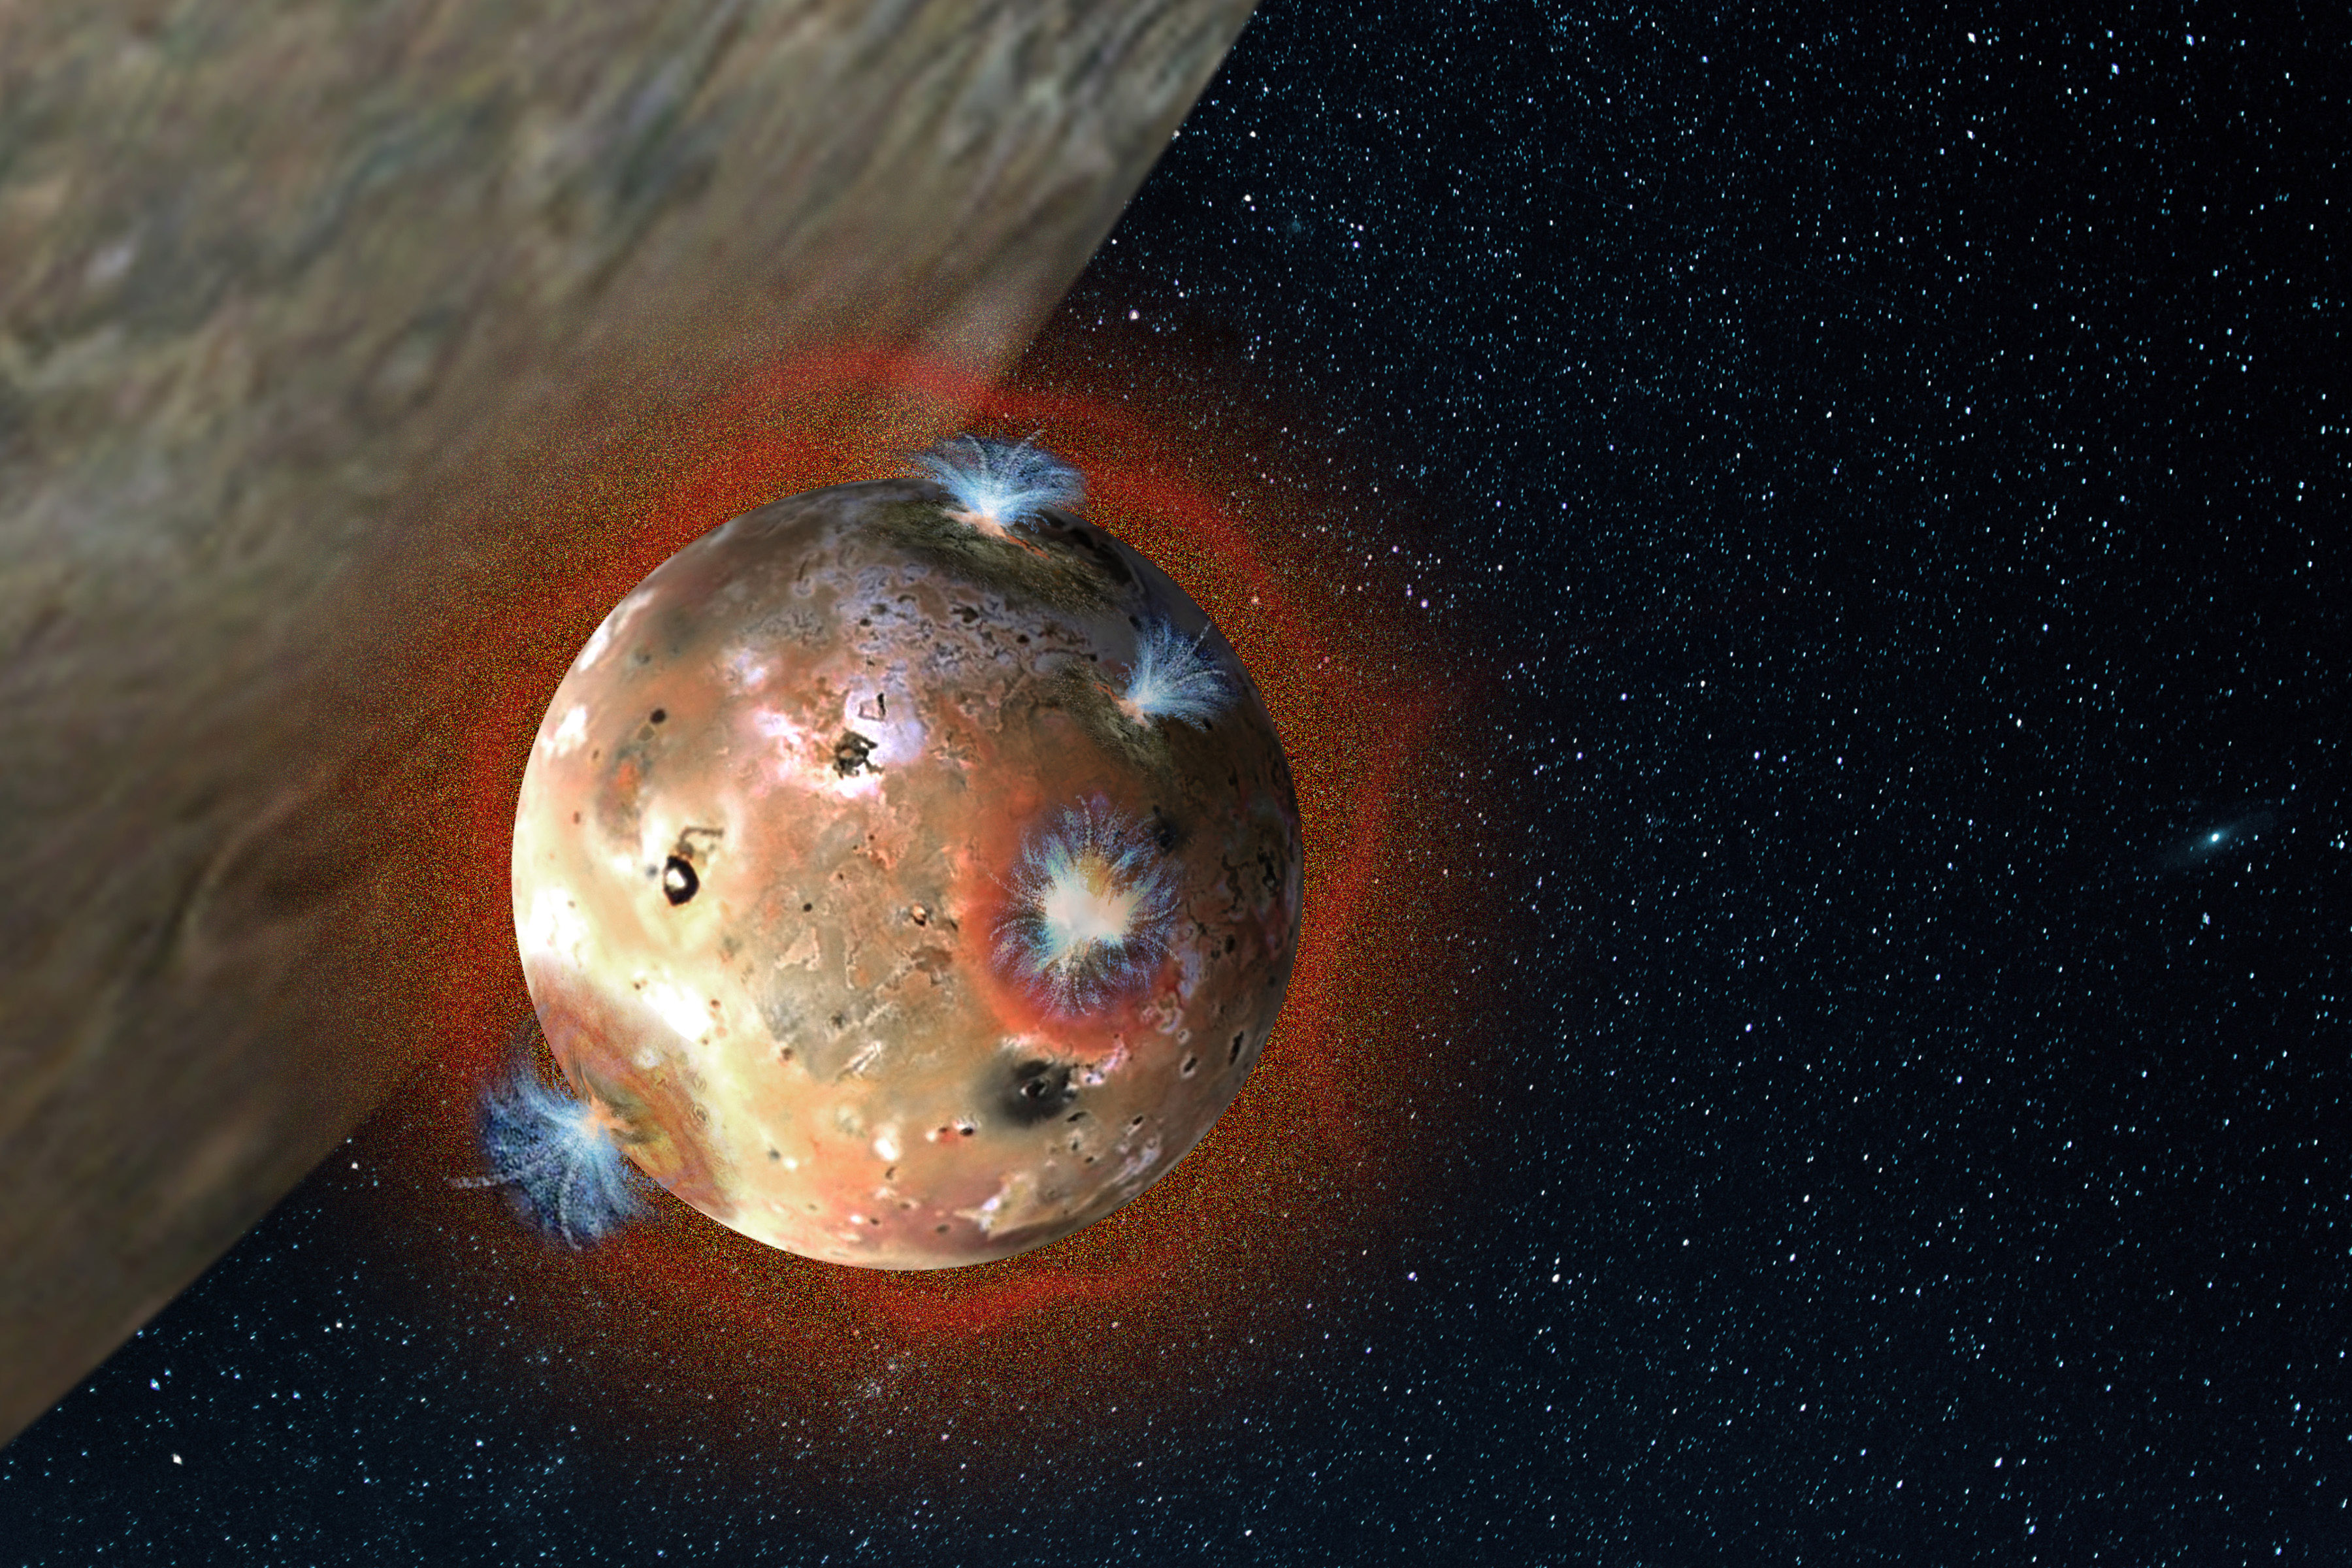 Jupiter's Volcanic Moon Io Has a Collapsible Atmosphere